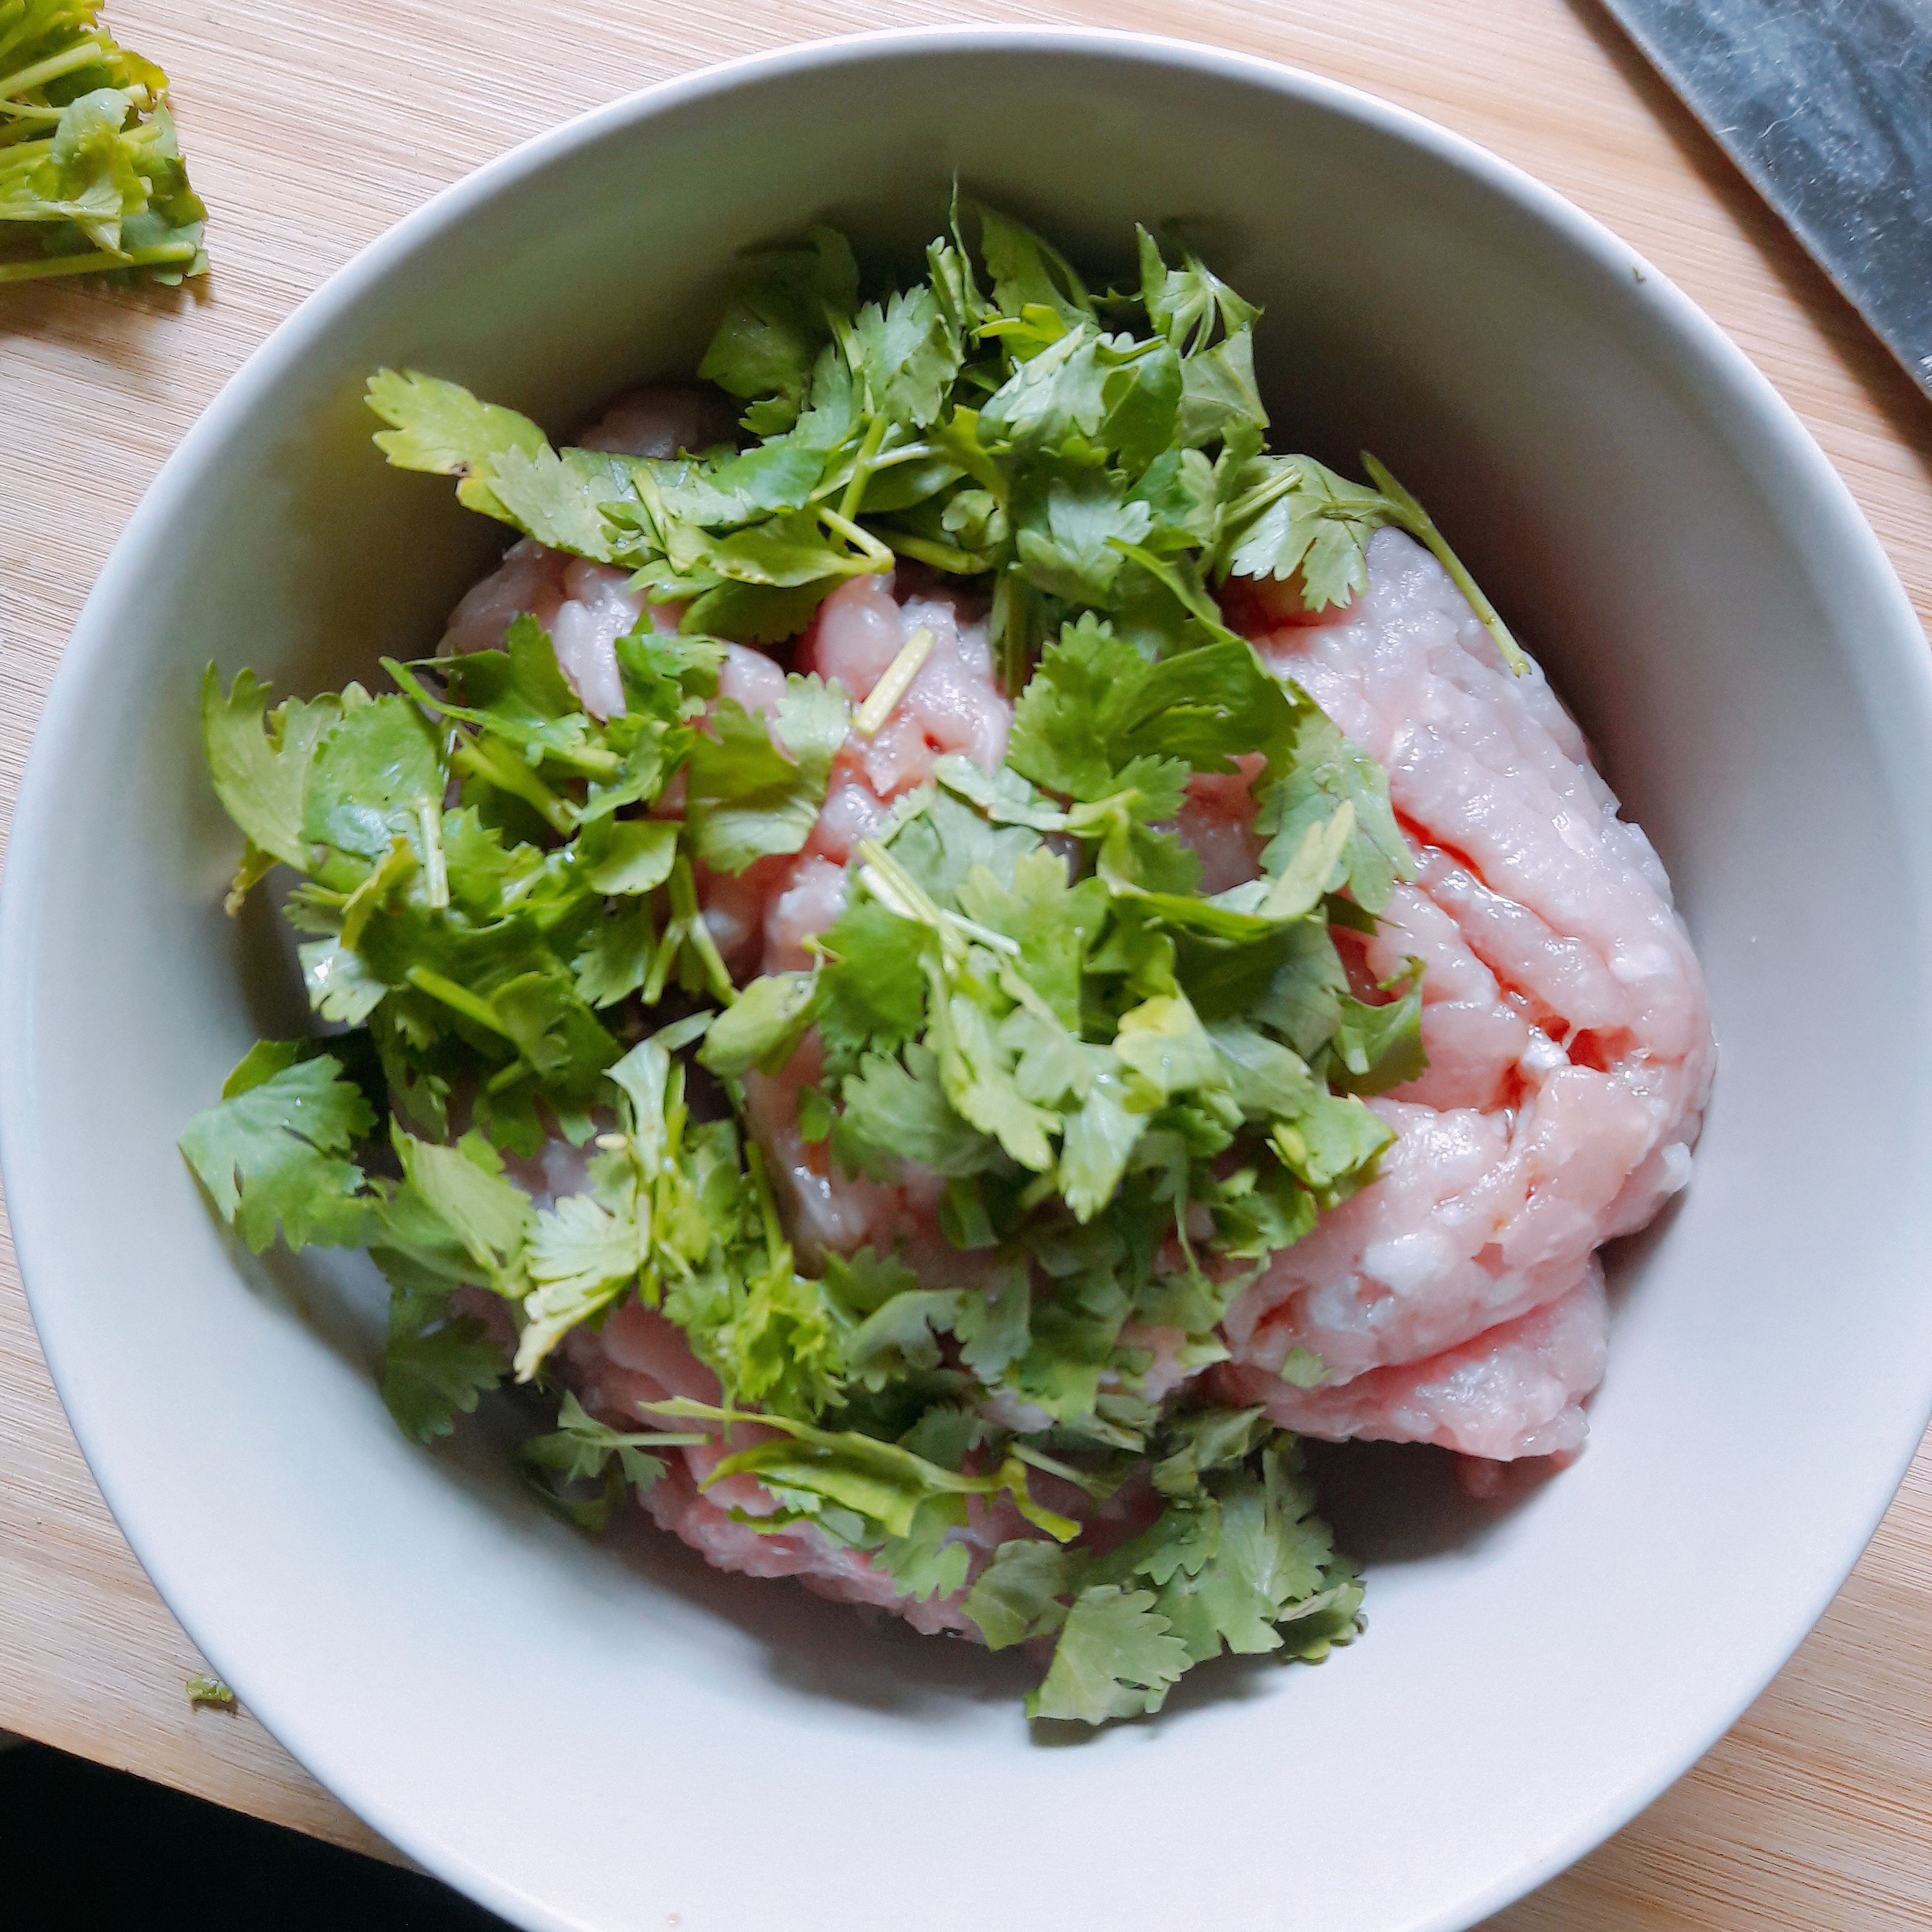 To make the dumplings filling, take the bacon and chop into small pieces and place in the pork bowl. Then add some coriander leaves, salt, pepper, soy sauce and an egg. Use chopsticks or a fork to vigorously mix the filling until the texture becomes very sticky.